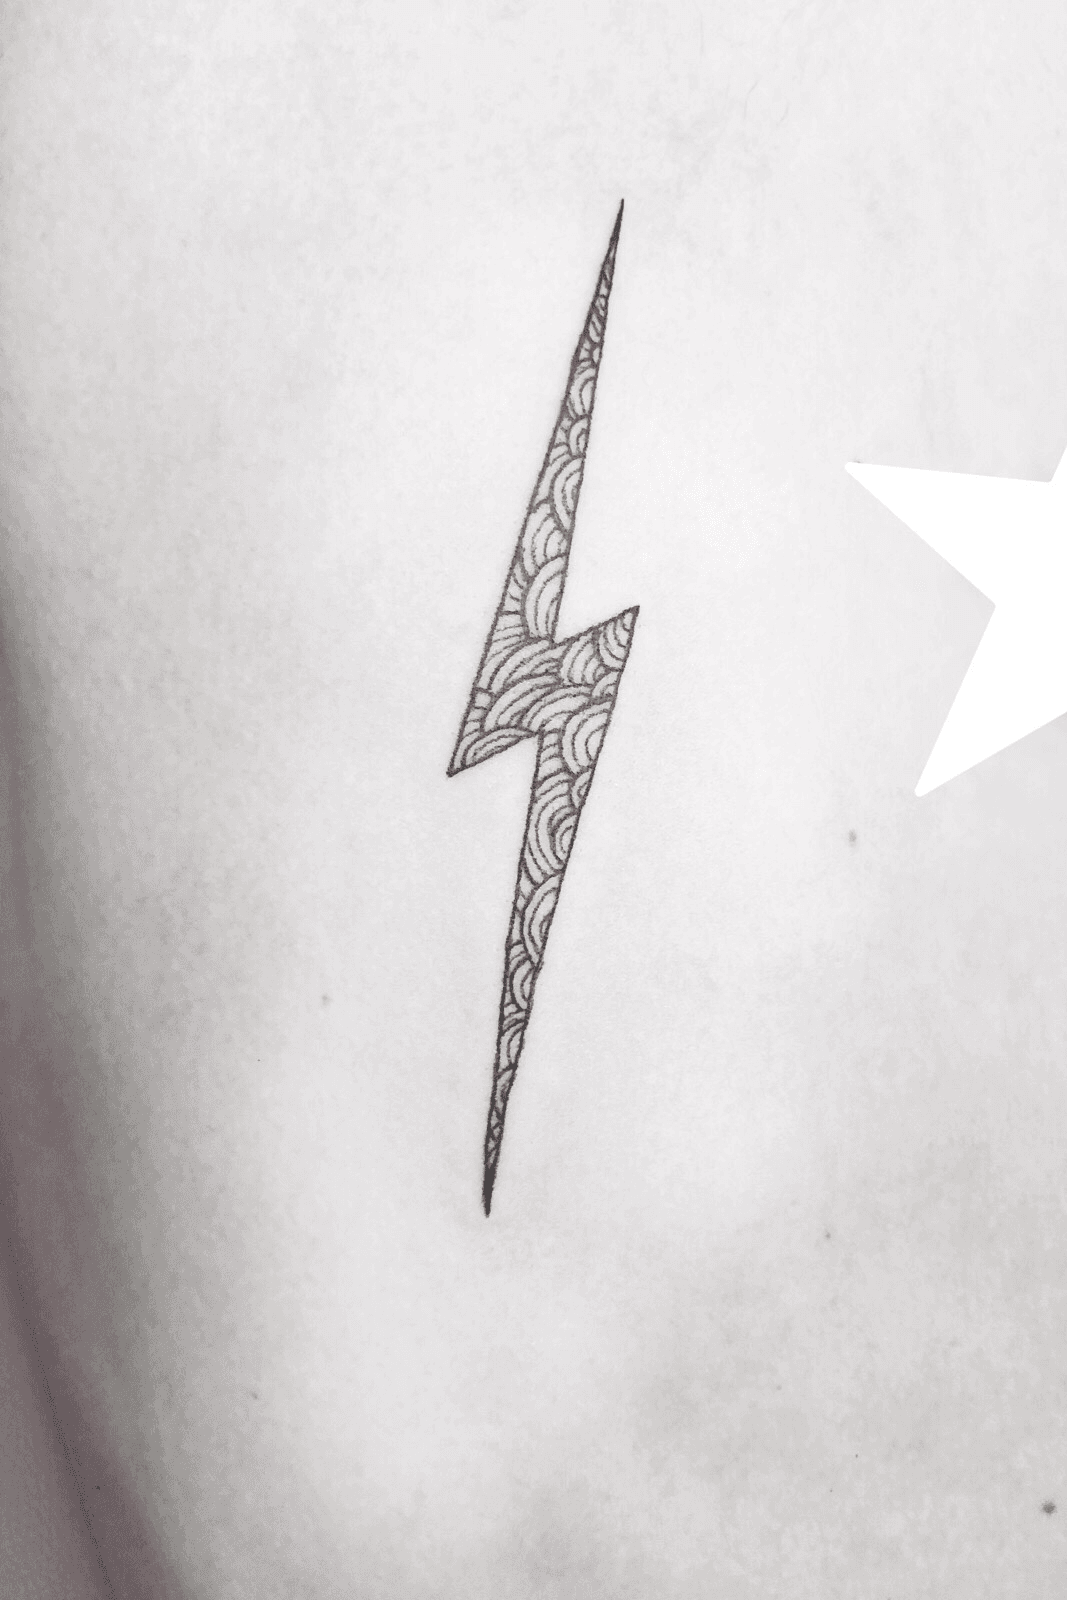 Best Lightning Tattoo Designs with Meaning